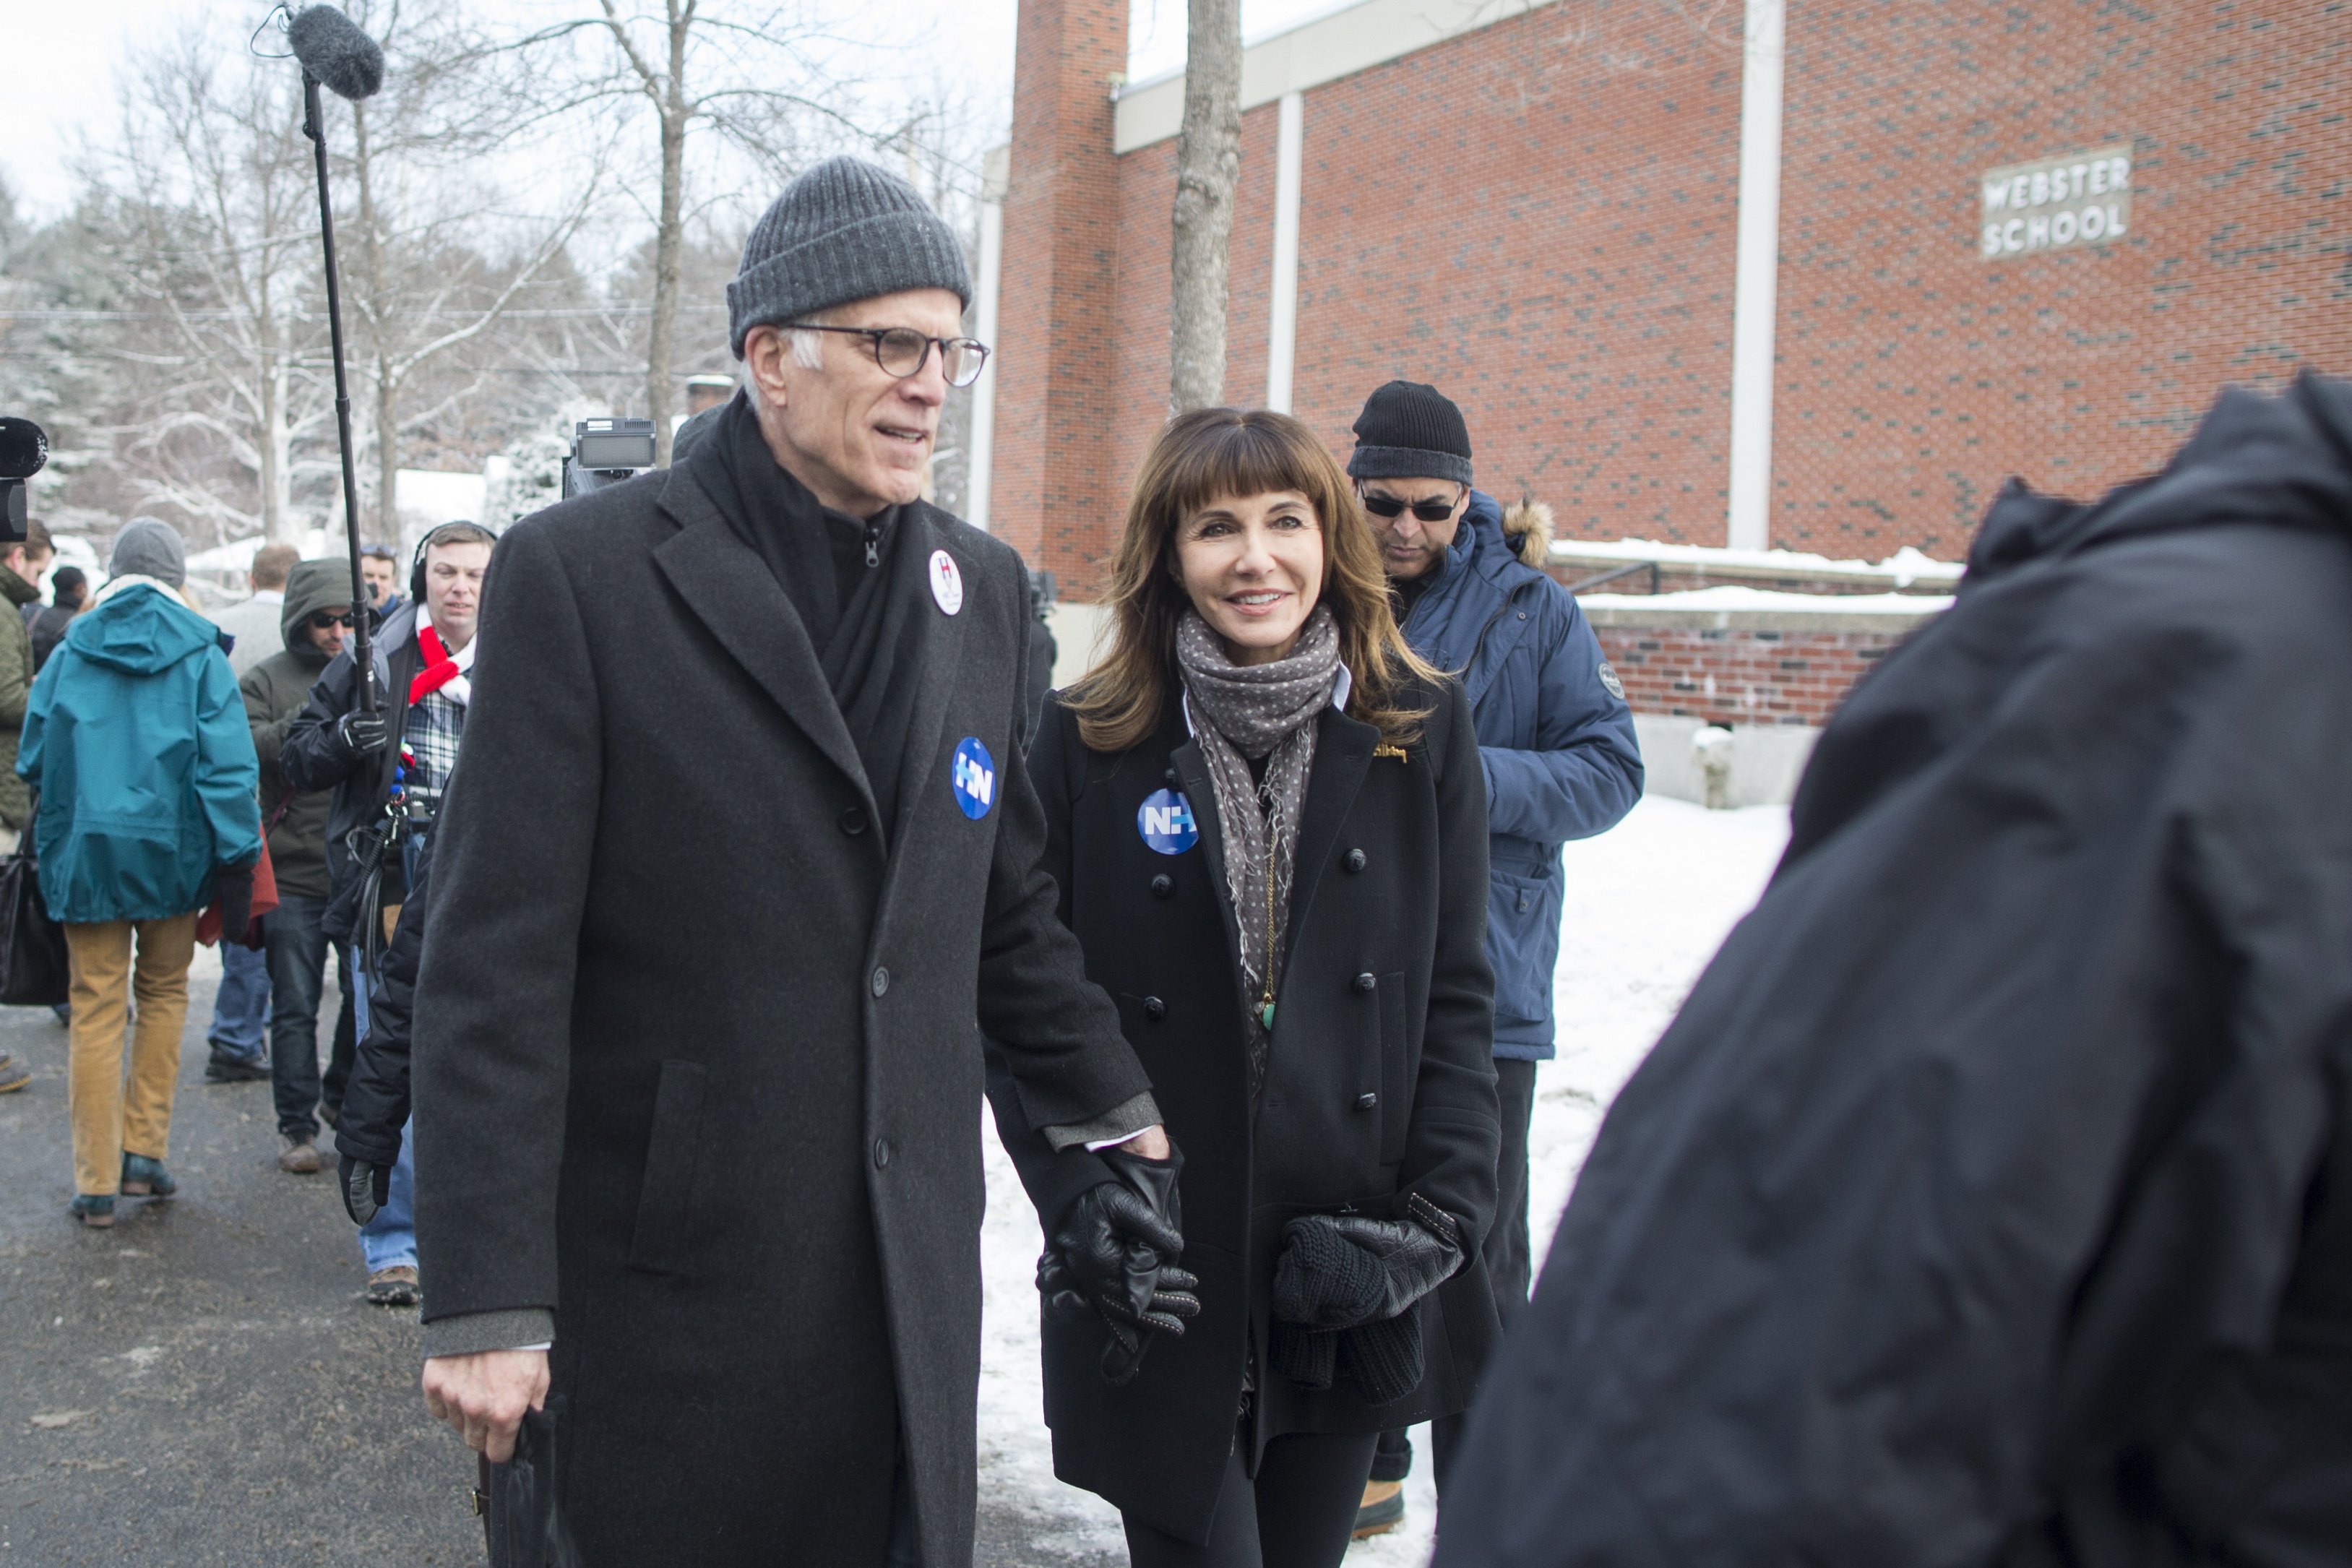 Ted Danson and his wife Mary Steenburgen walk outside the polling place at the Webster School February 9, 2016, in Manchester, New Hampshire. | Source: Getty Images.